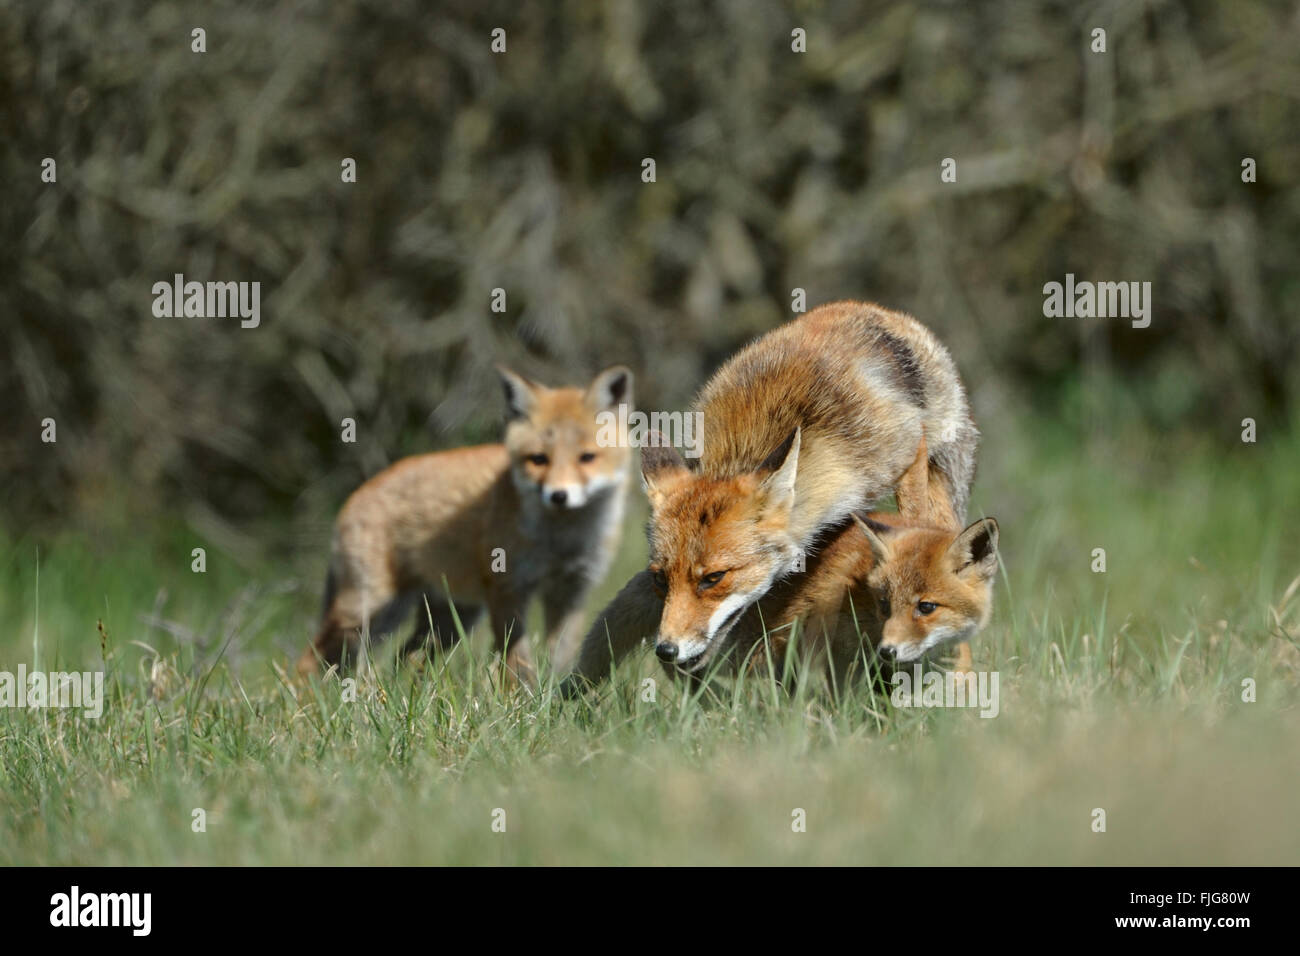 Red Foxes / Rotfuechse ( Vulpes vulpes ), vixen with two cubs, fox family plays together in the grass in front of some bushes. Stock Photo